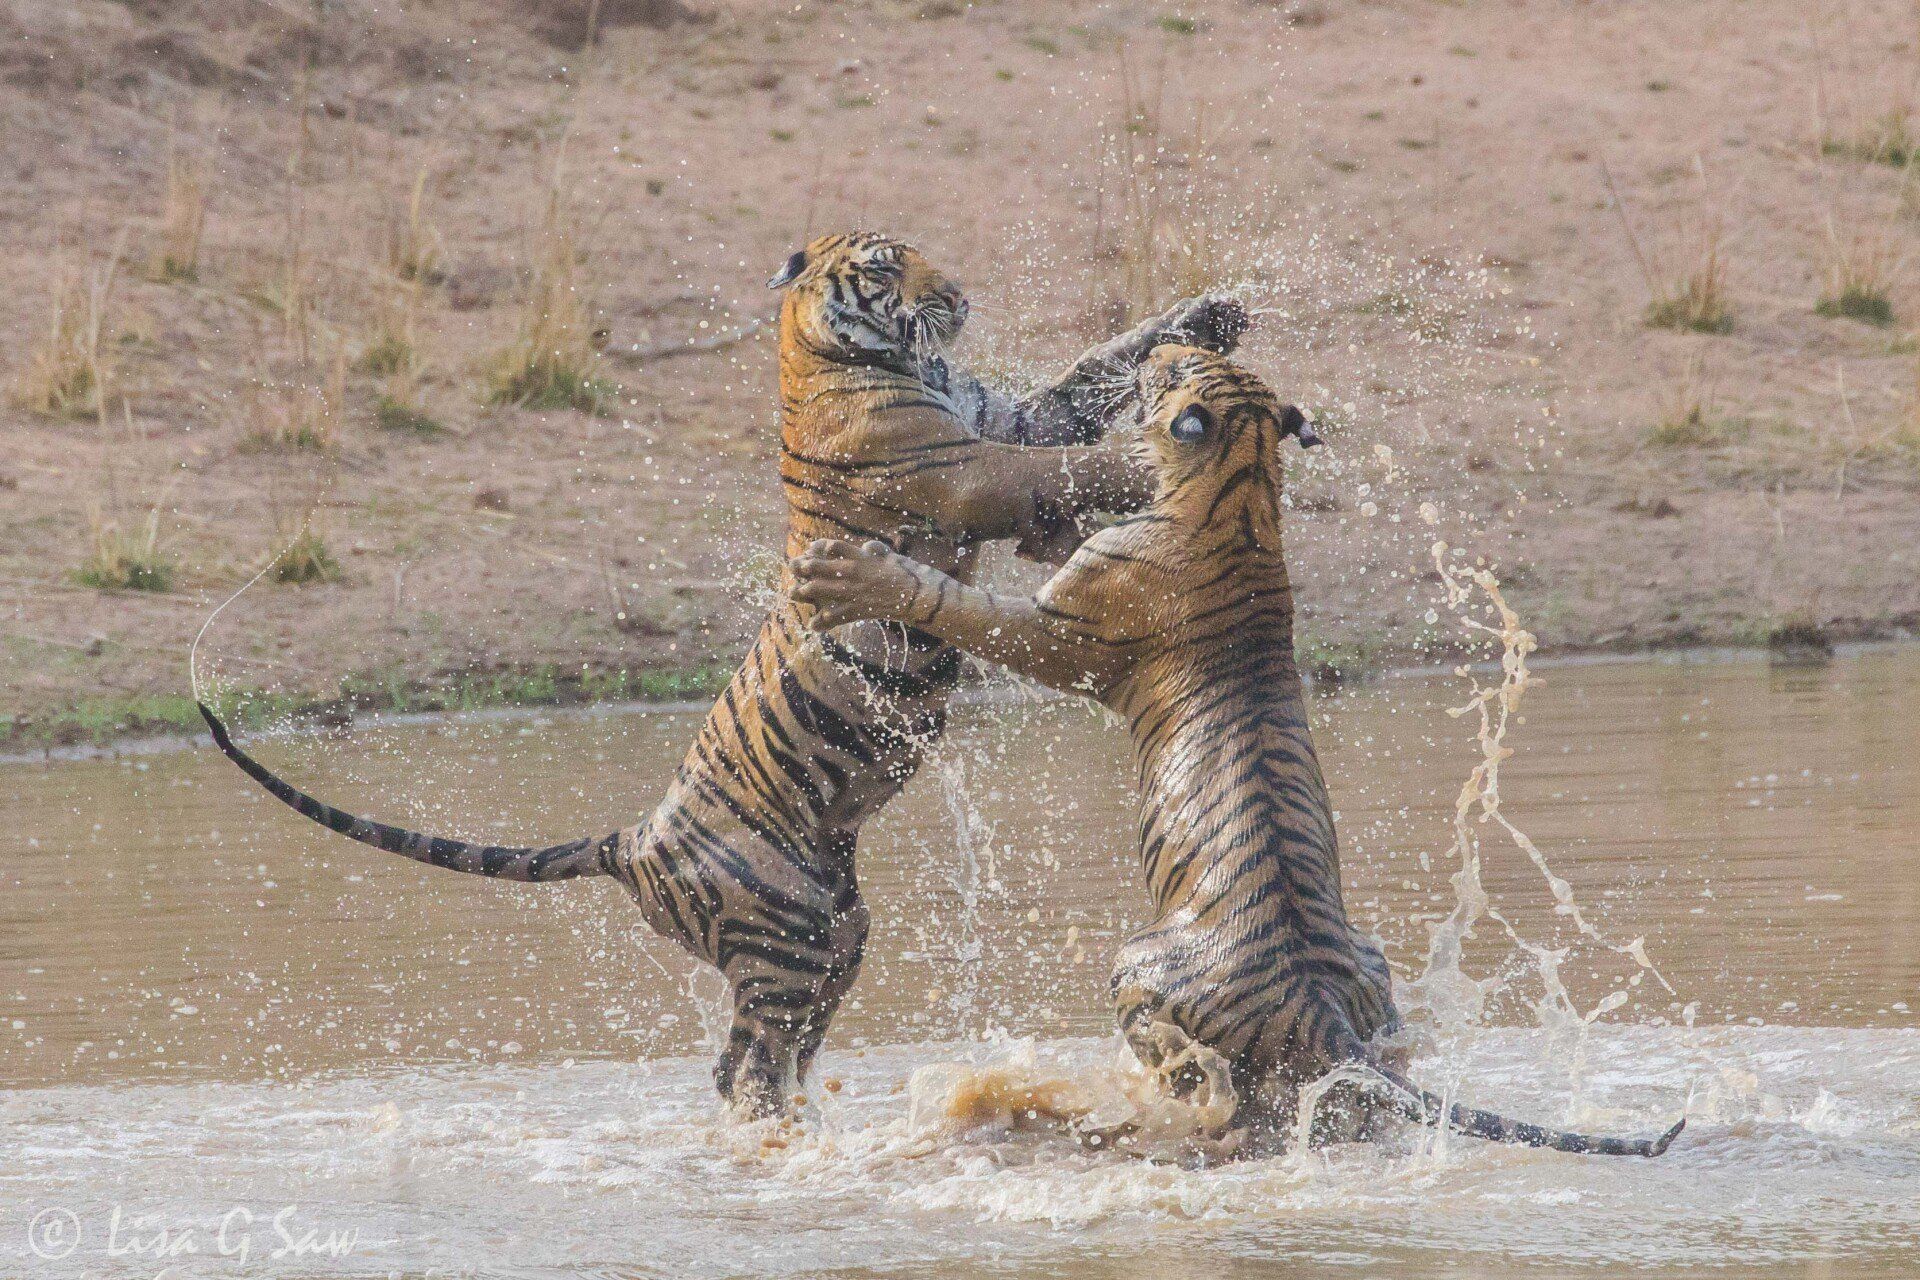 Two young tigers upright play fighting in water